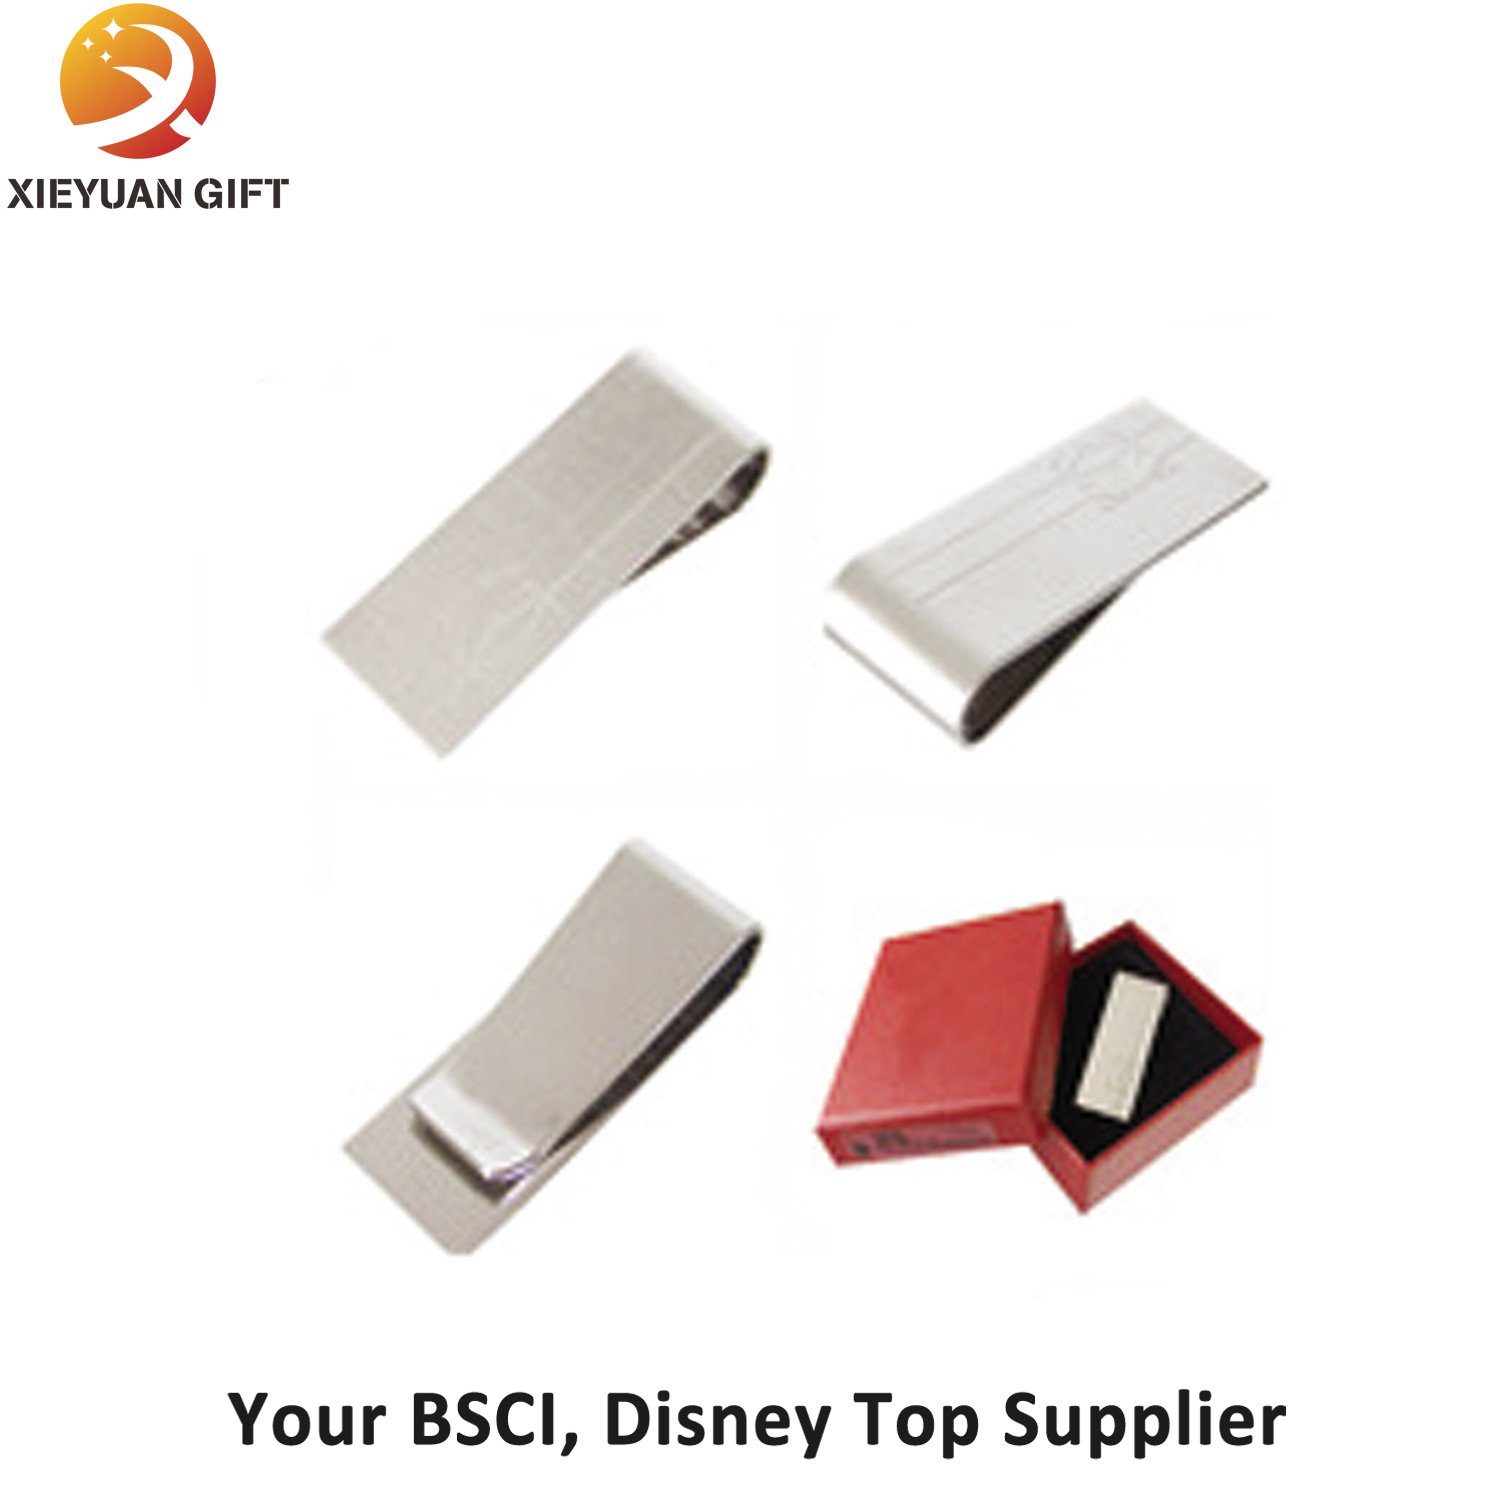 China Supplier Wholesale Stainless Money Clip for Gifts